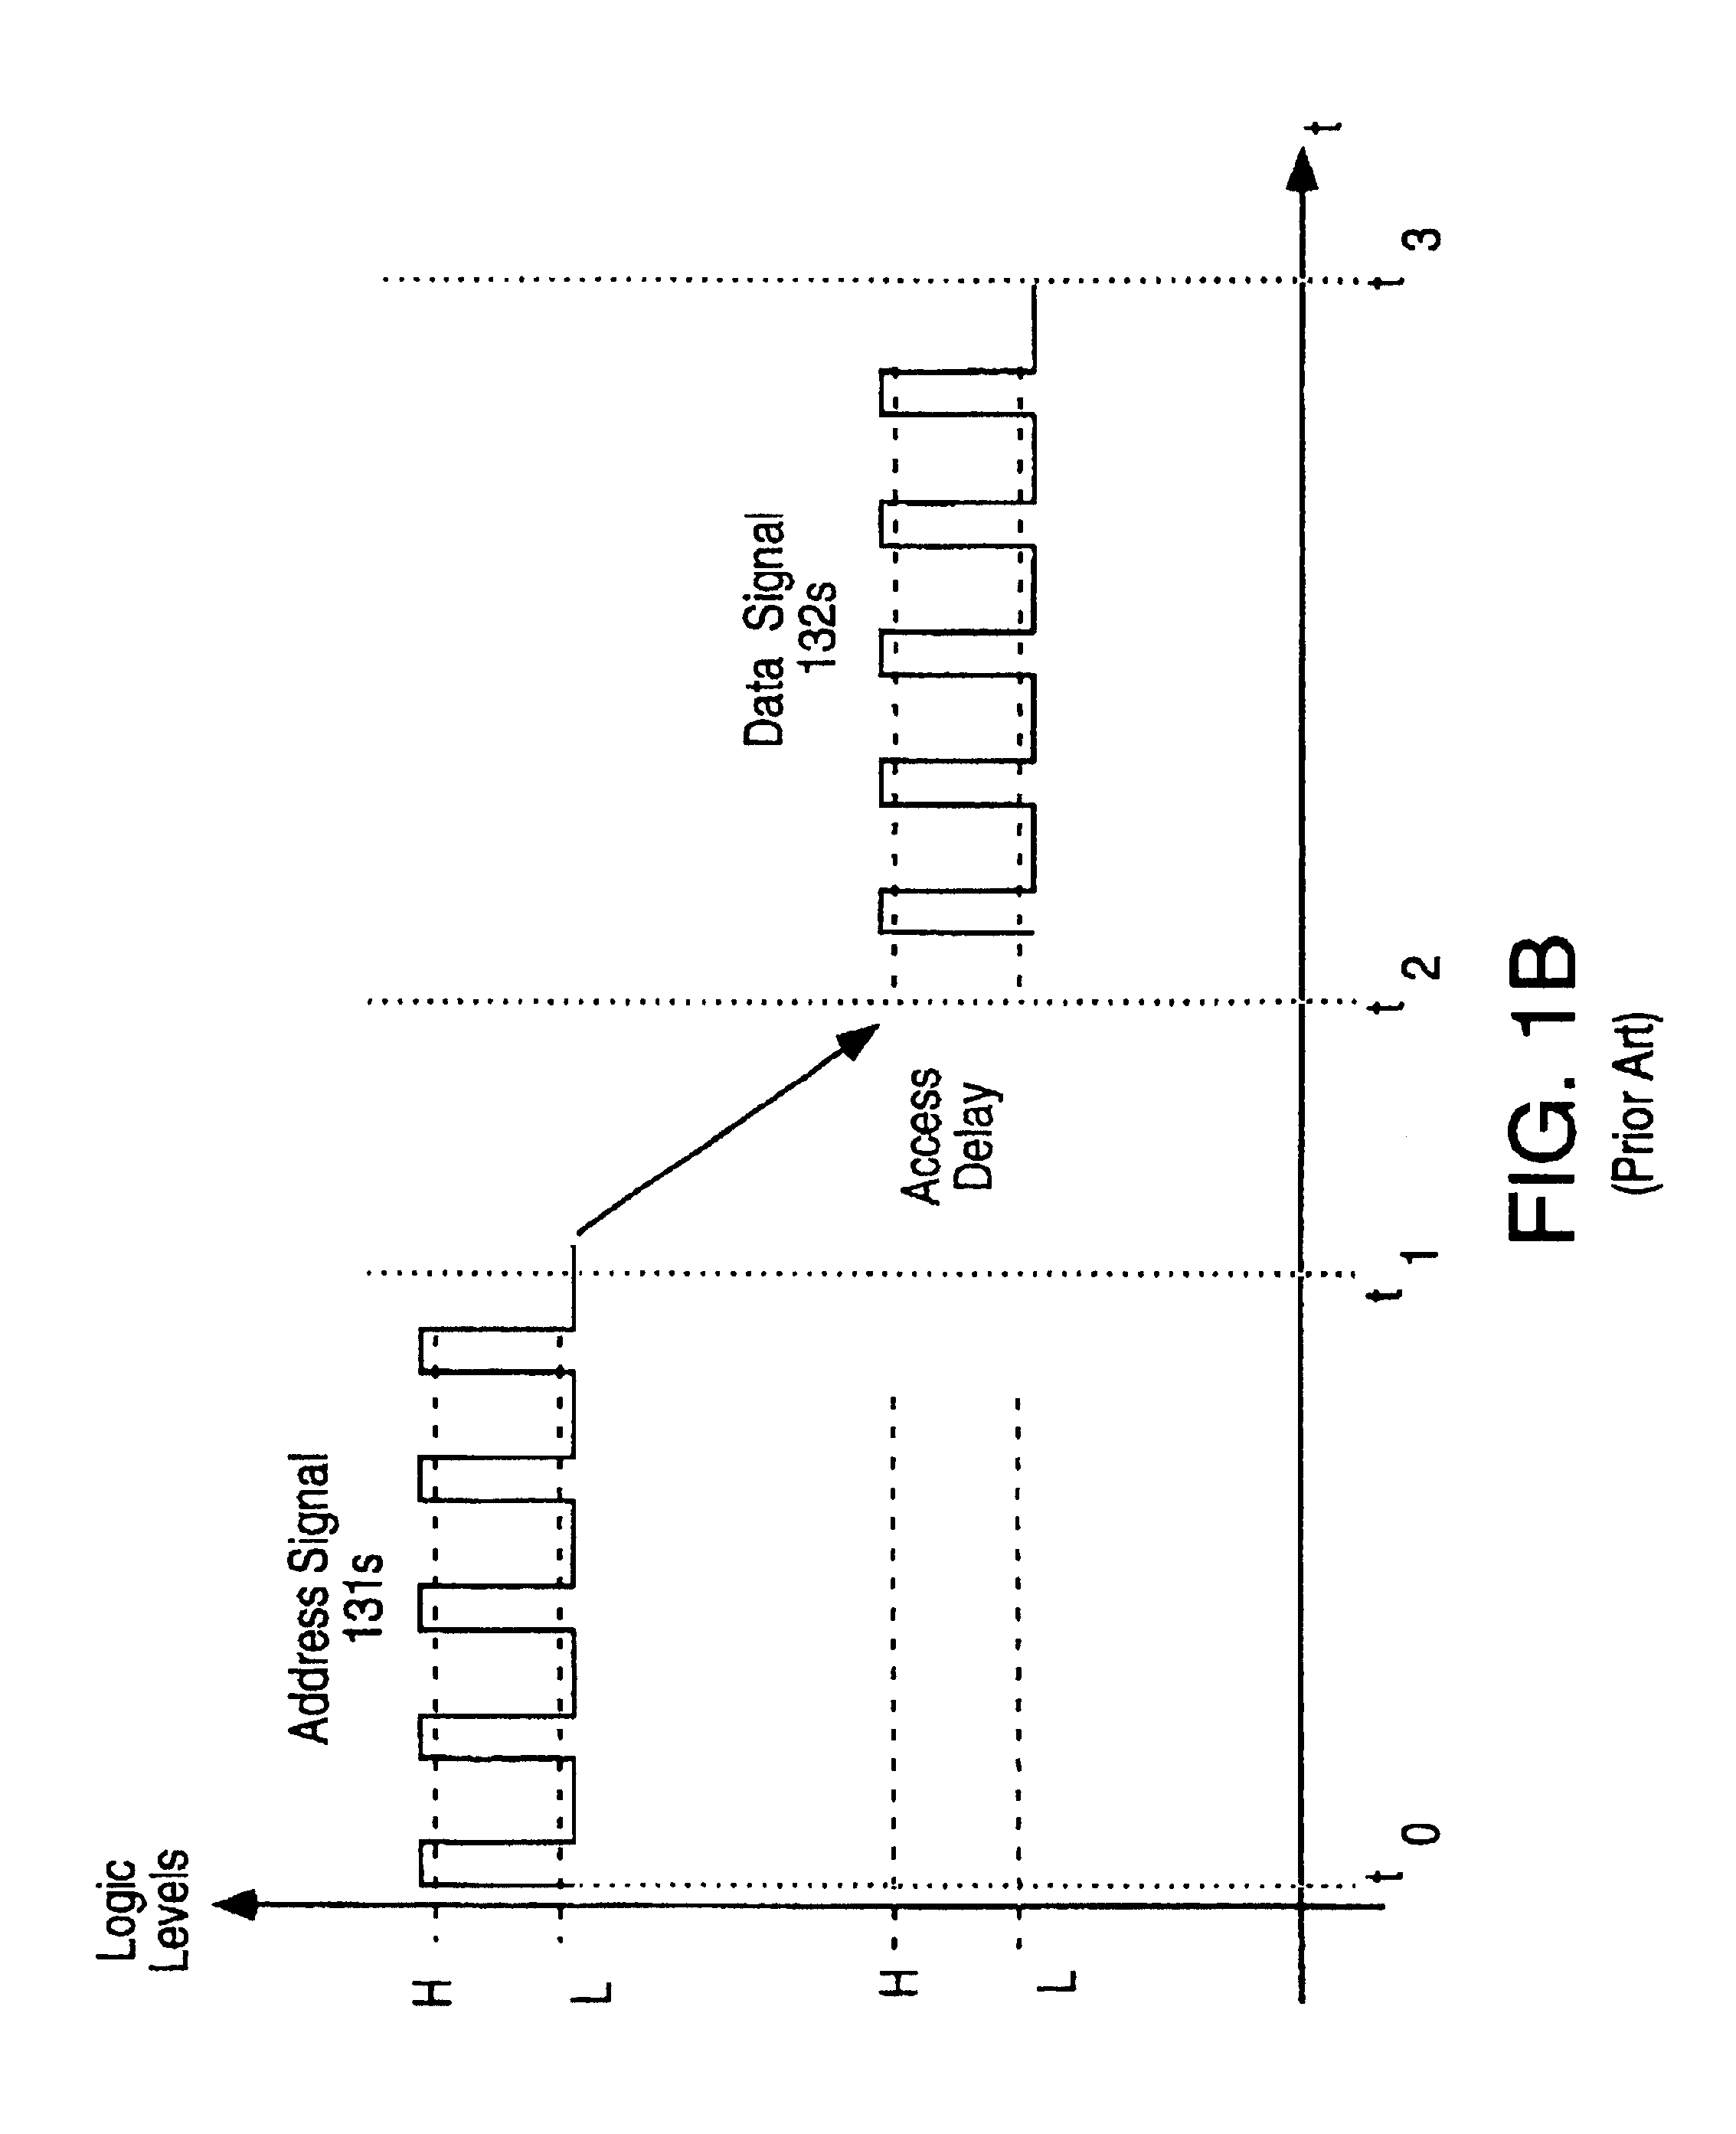 Data processing system and method for detecting mandatory relations violation in a relational database